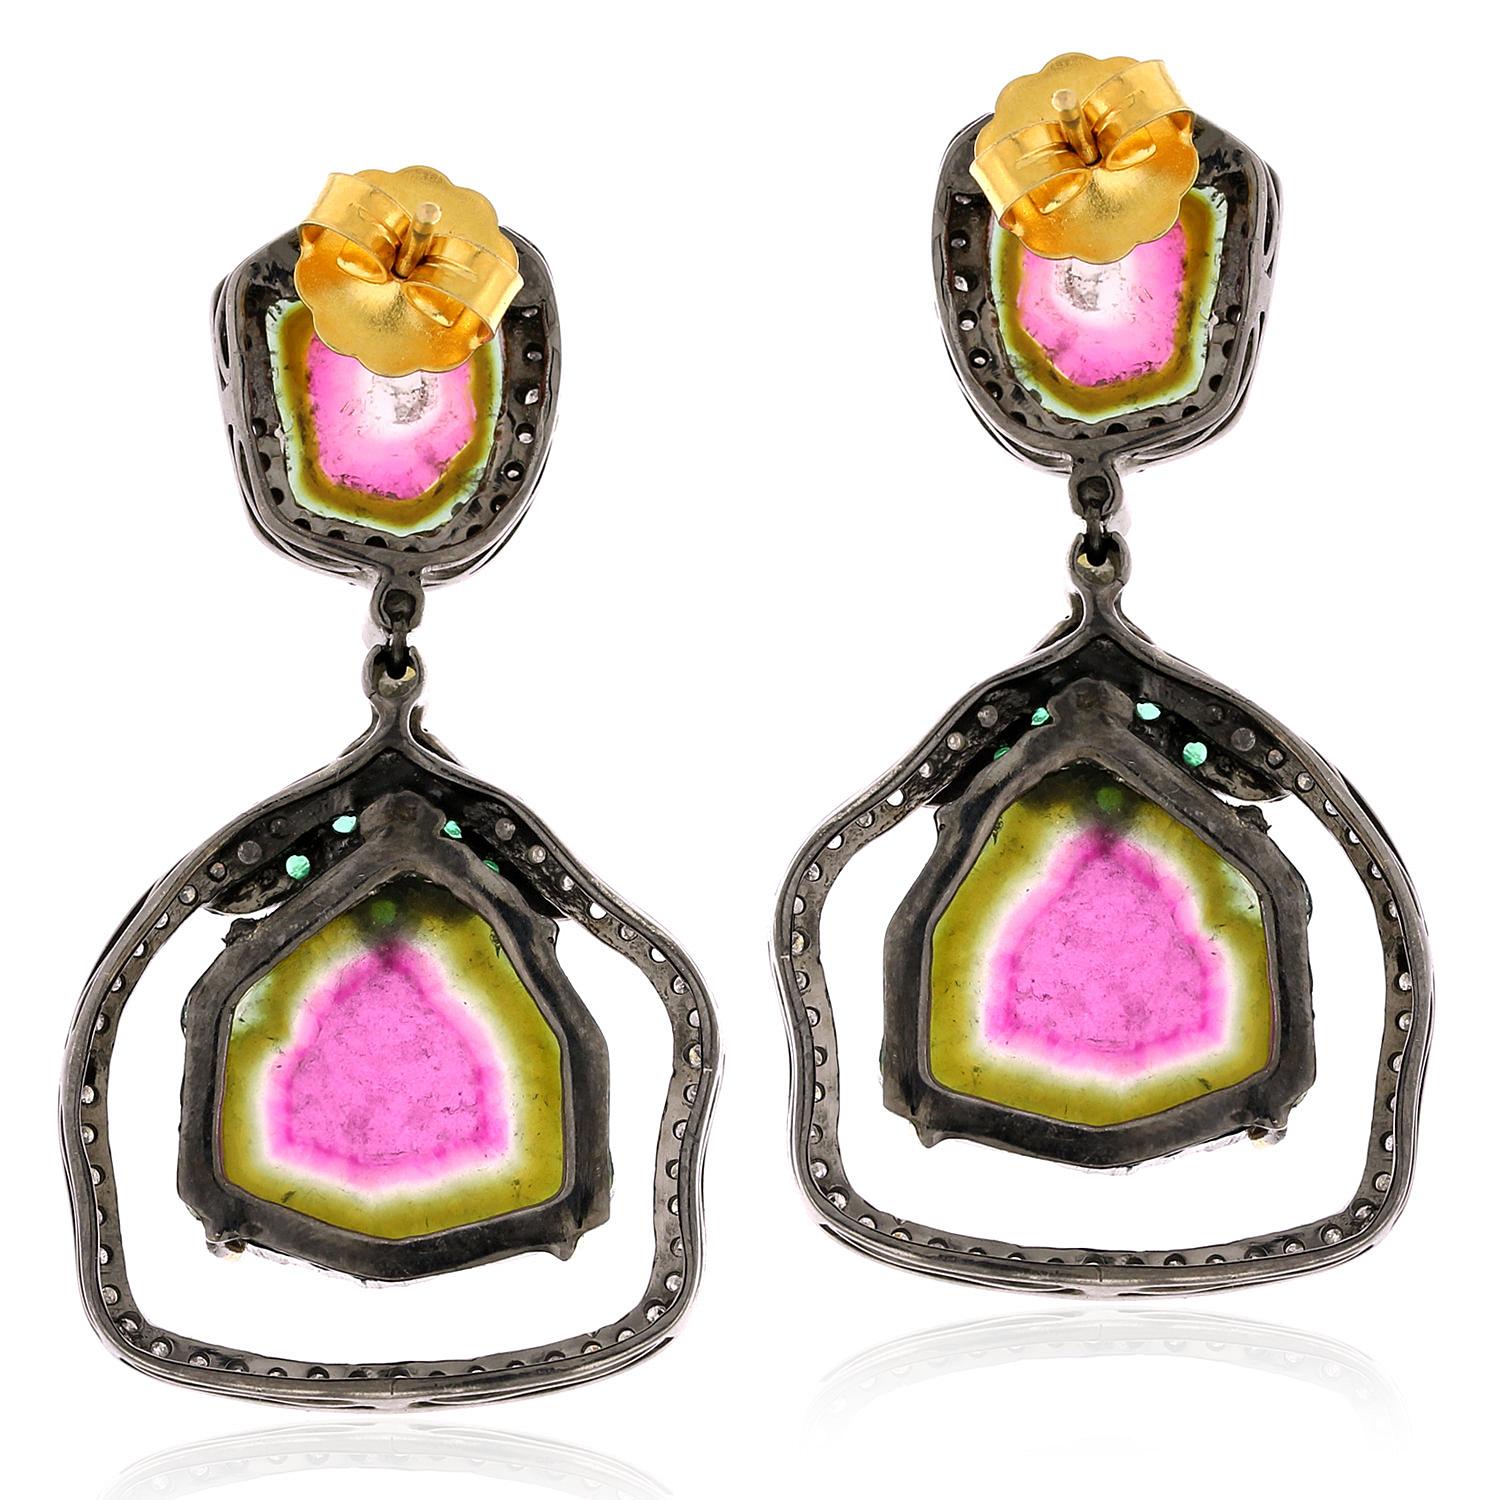 The watermelon tourmaline gemstones have a stunning pink and green color that is reminiscent of the fruit they are named after. The emerald gemstones add a rich, vibrant green color to the earrings, while the pave diamonds add a touch of sparkle and